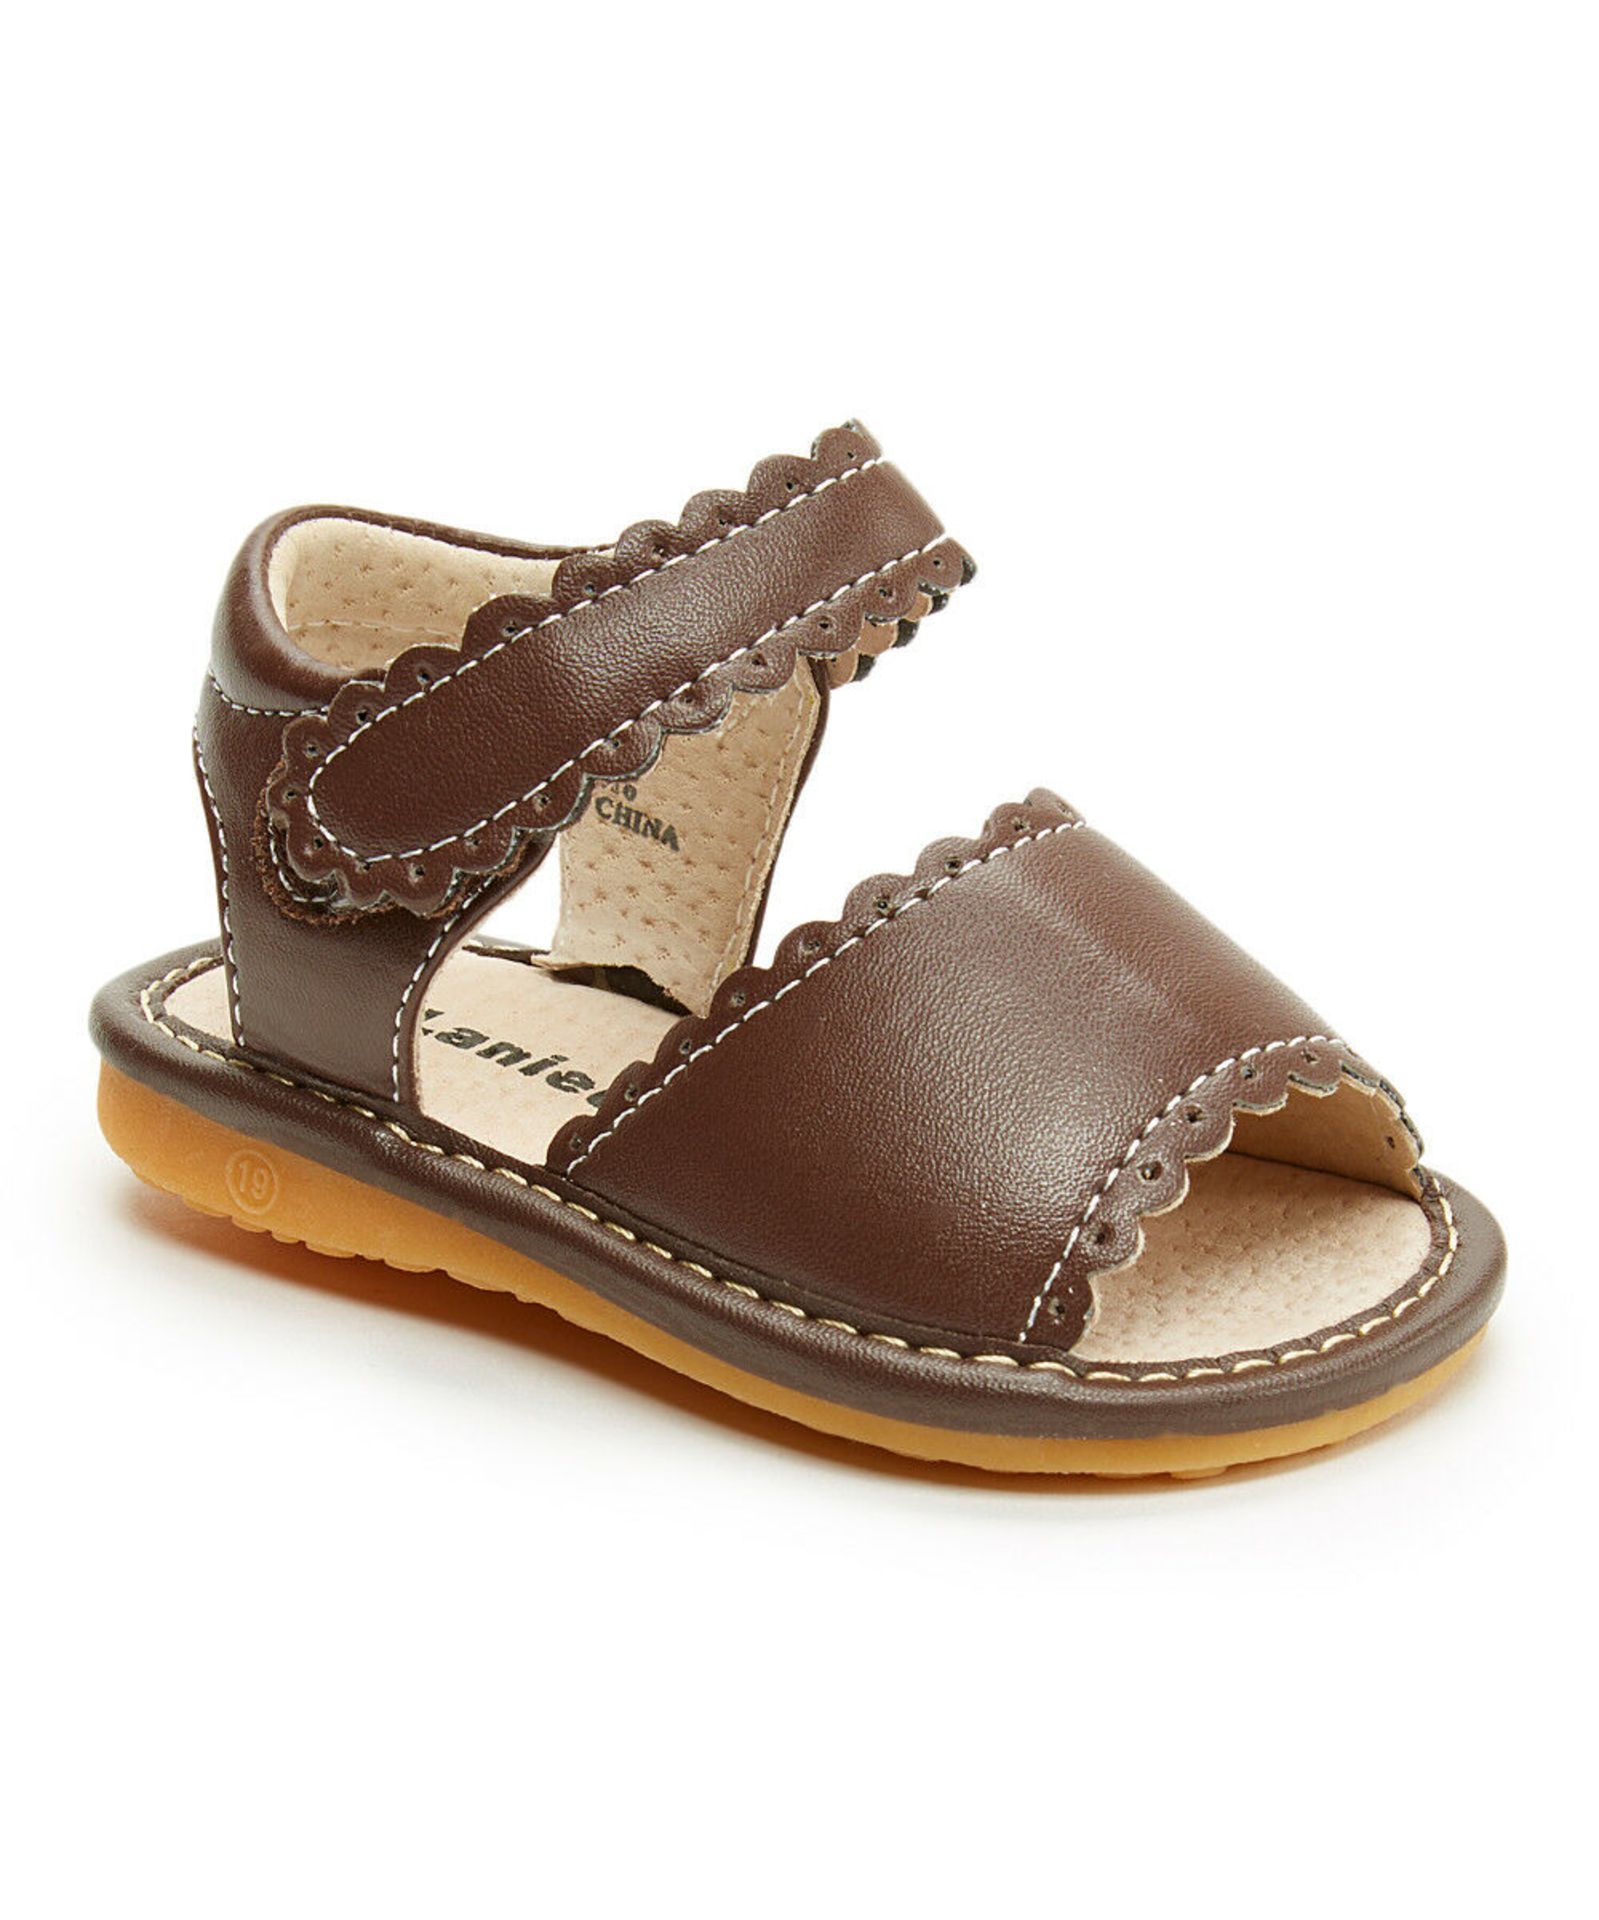 Laniecakes Brown Scallop Emily Squeaker Sandal (Uk Size:2/Us Size:3) (New Without Box) [Ref: